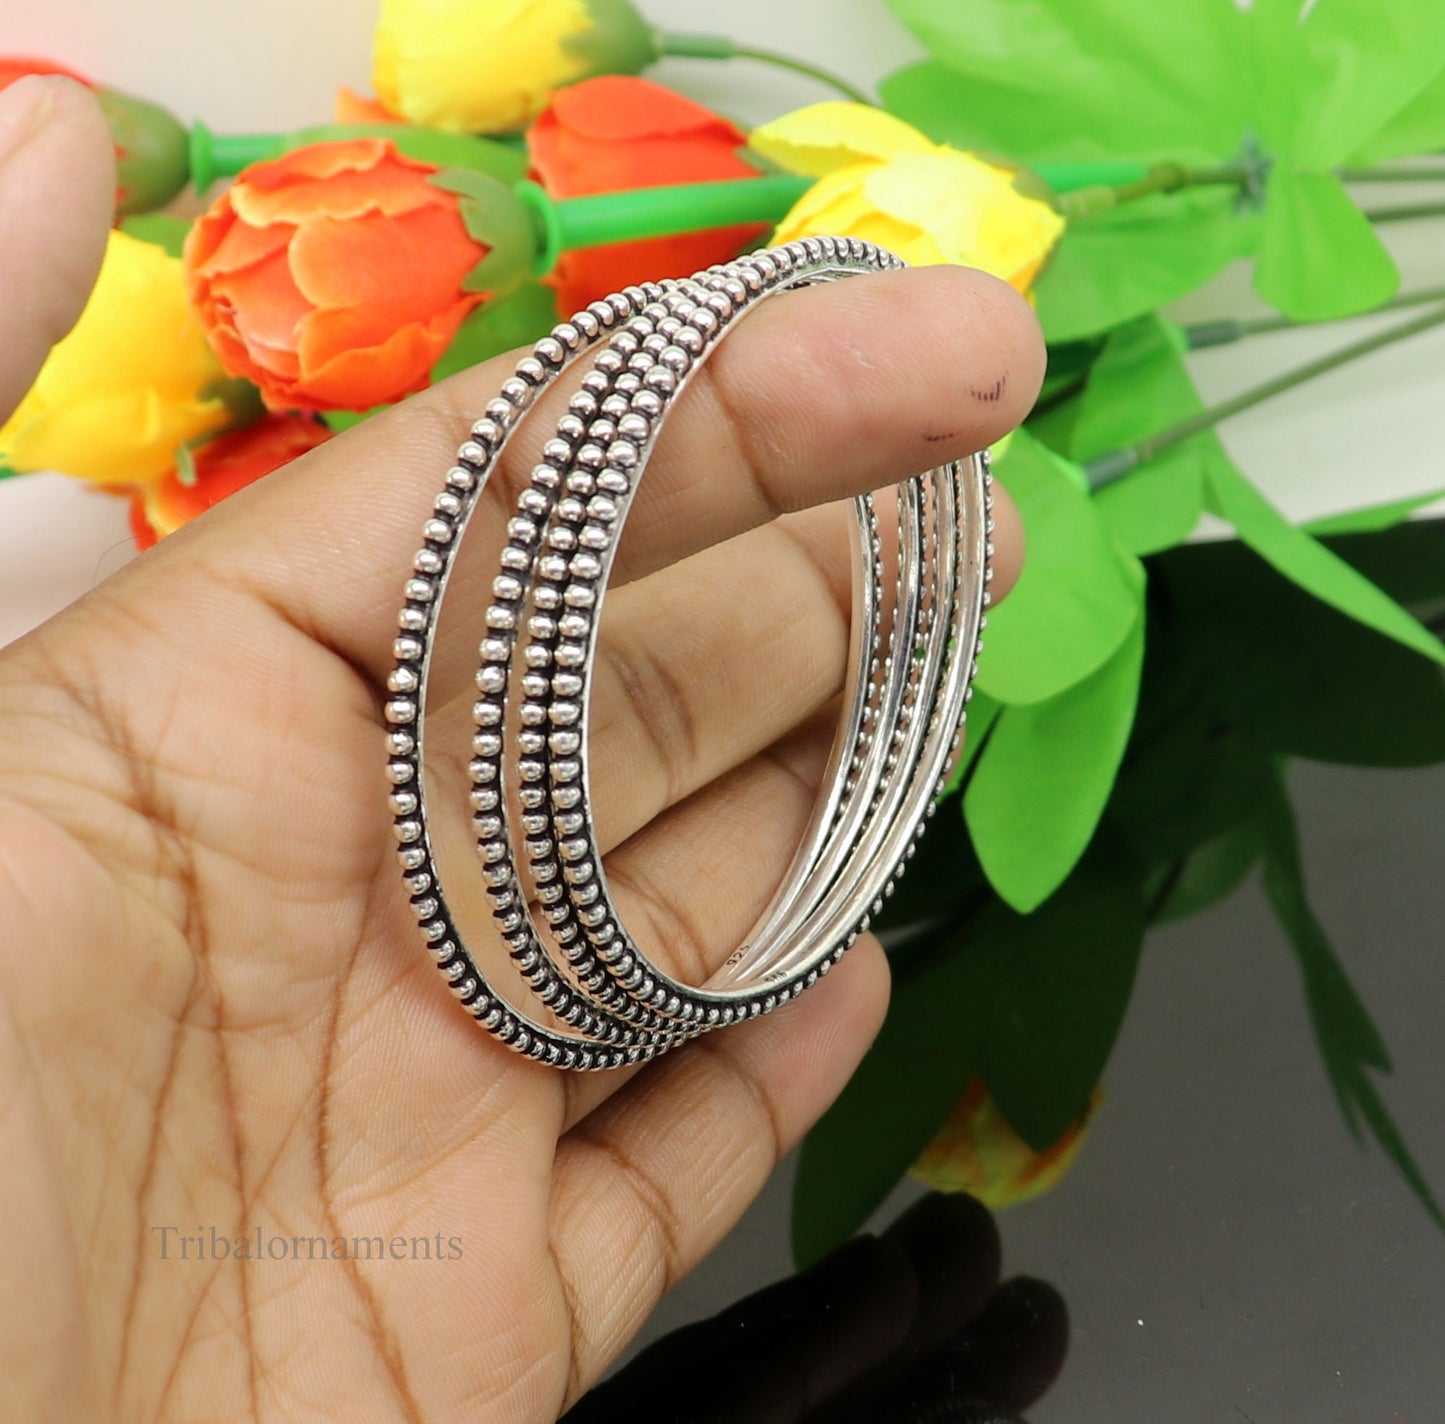 925 sterling customized waved silver balls work stylish designer bangle bracelet pure silver gifting jewelry, brides made bangles  nba177 - TRIBAL ORNAMENTS